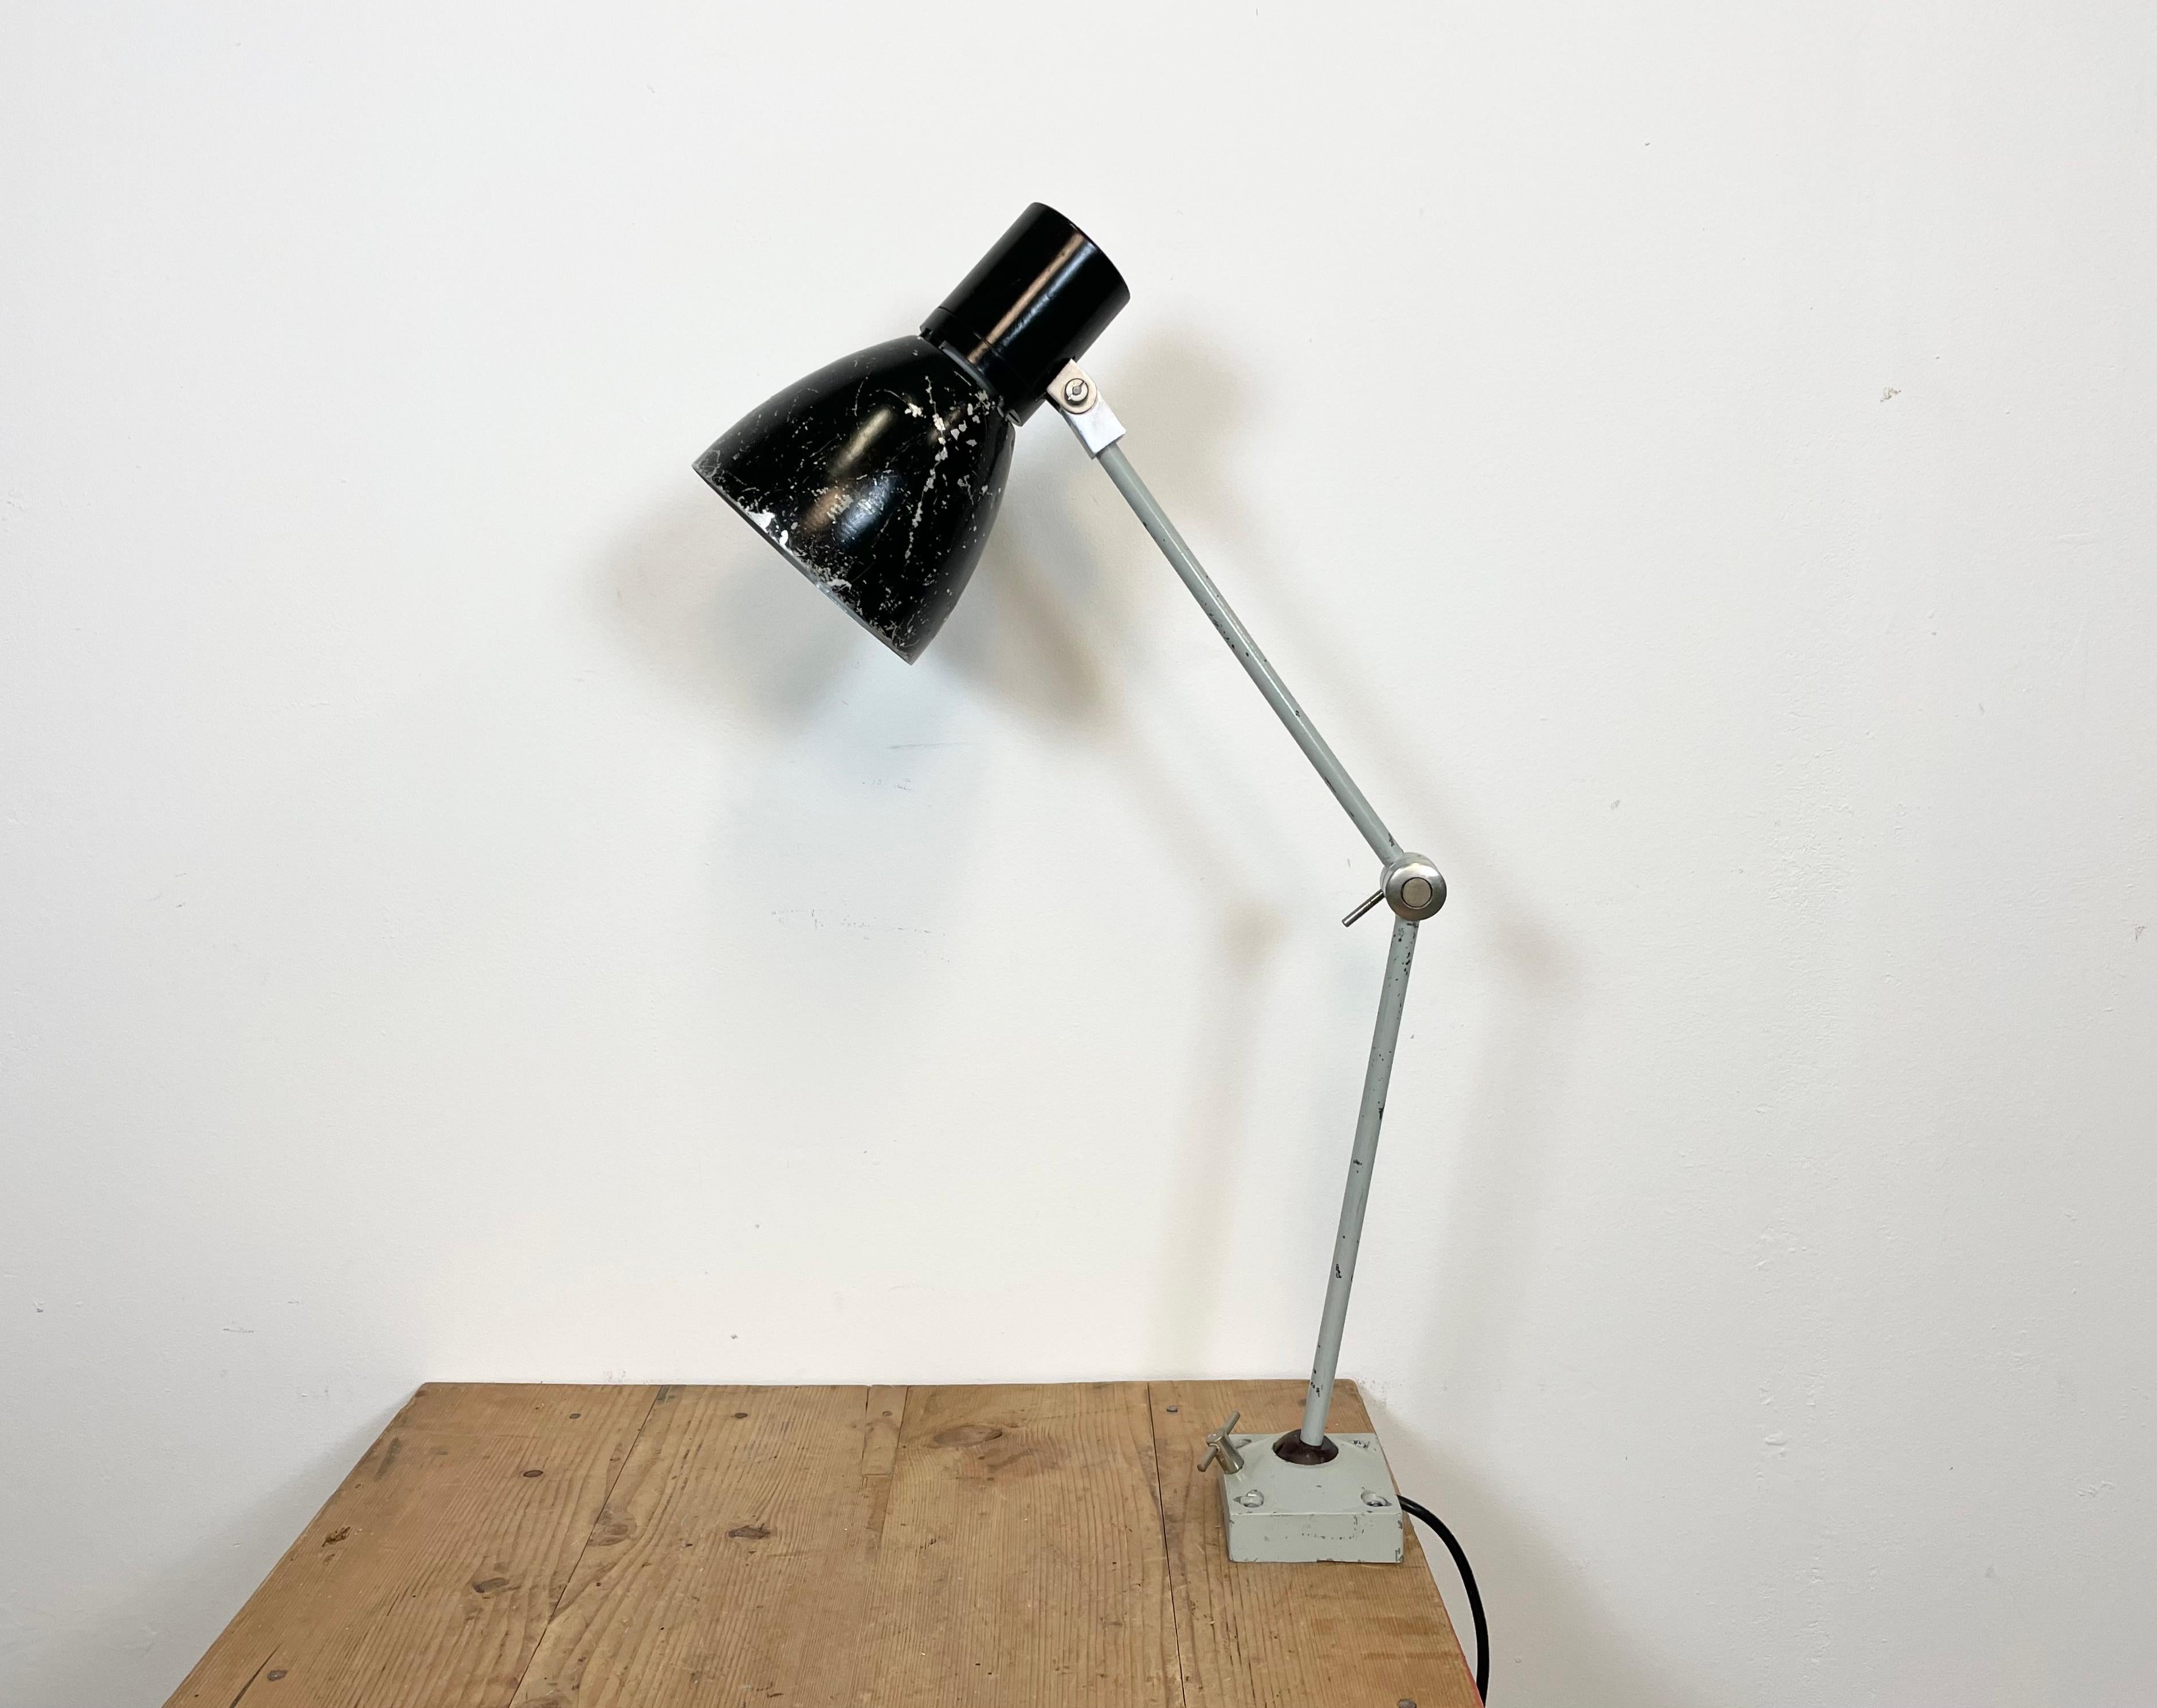 Industrial table lamp made by Elektrosvit in former Czechoslovakia during the 1970s. It features a grey iron base and arm with three adjustable joints and a black aluminium shade with bakelite top. The original switch is situated on the top. The